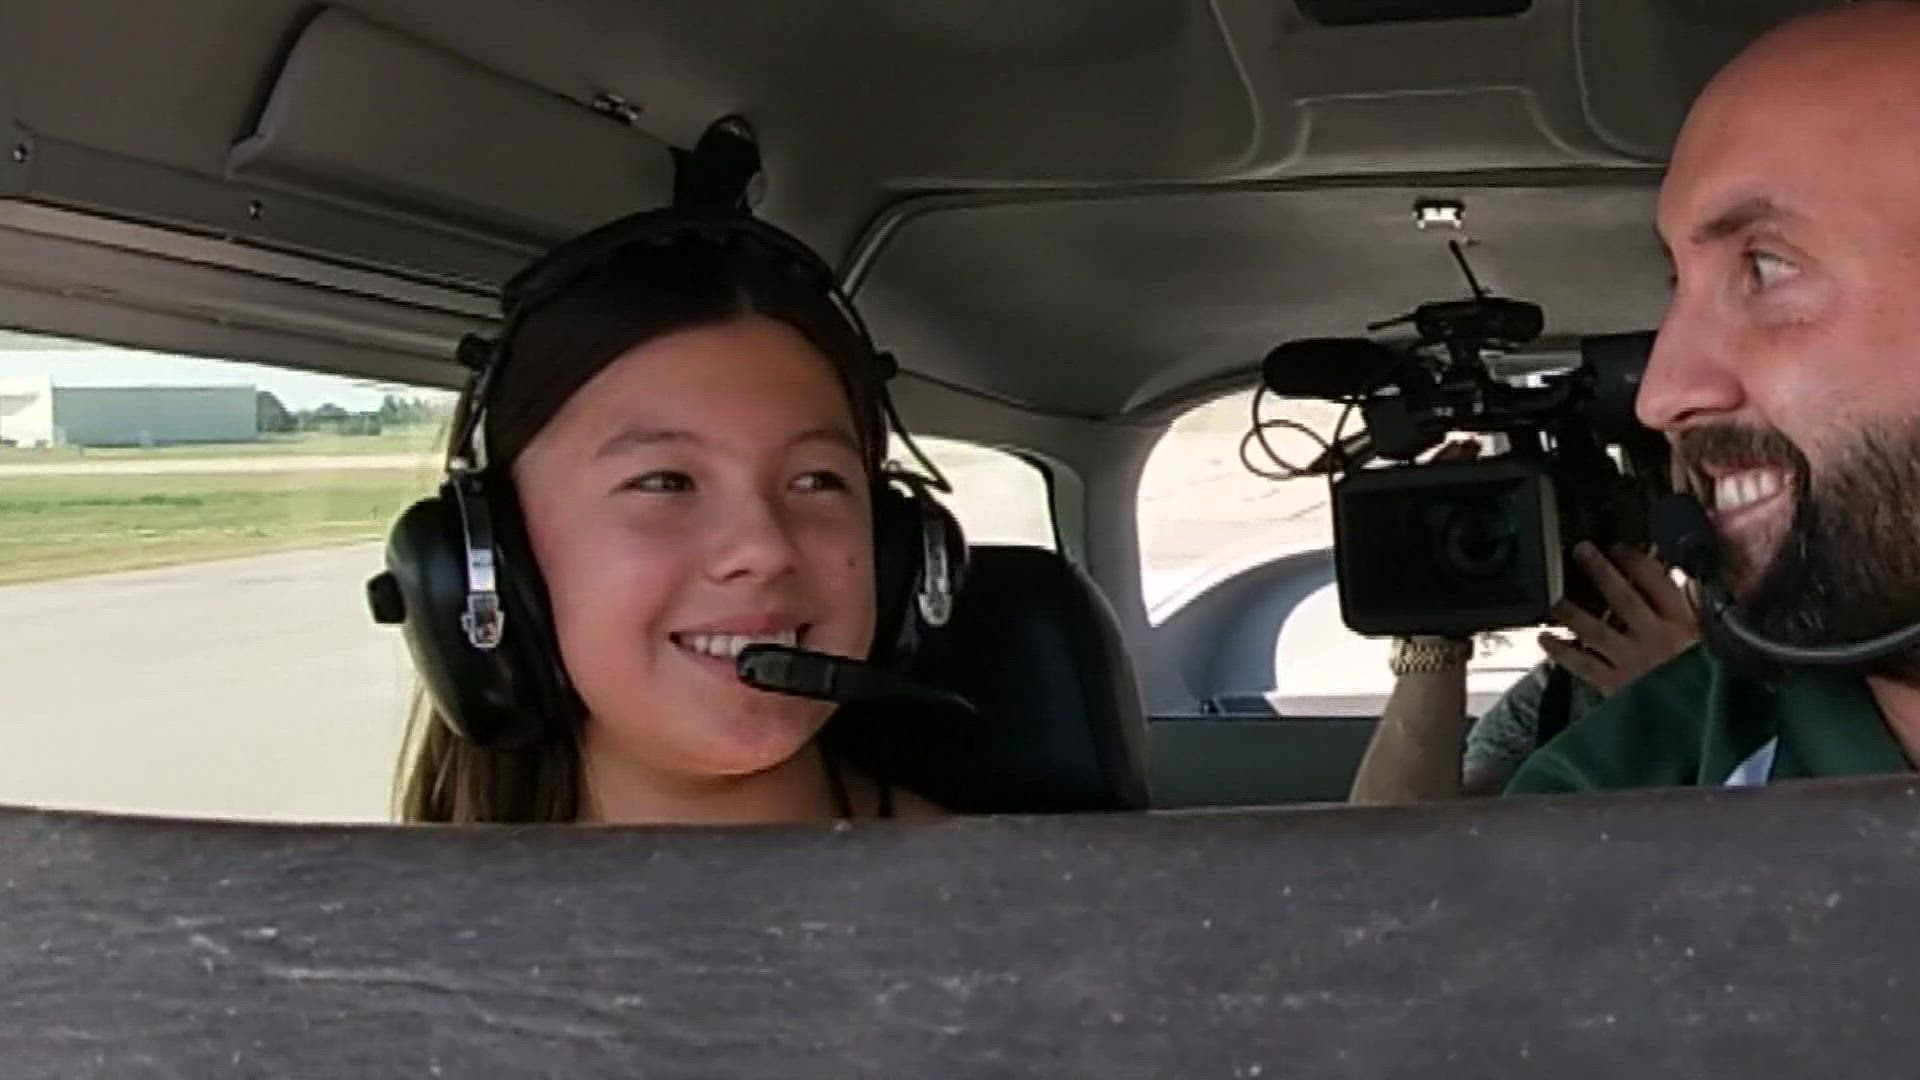 An 11-year-old from Bismarck, North Dakota is soaring to new heights through the Girl Scouts organization.